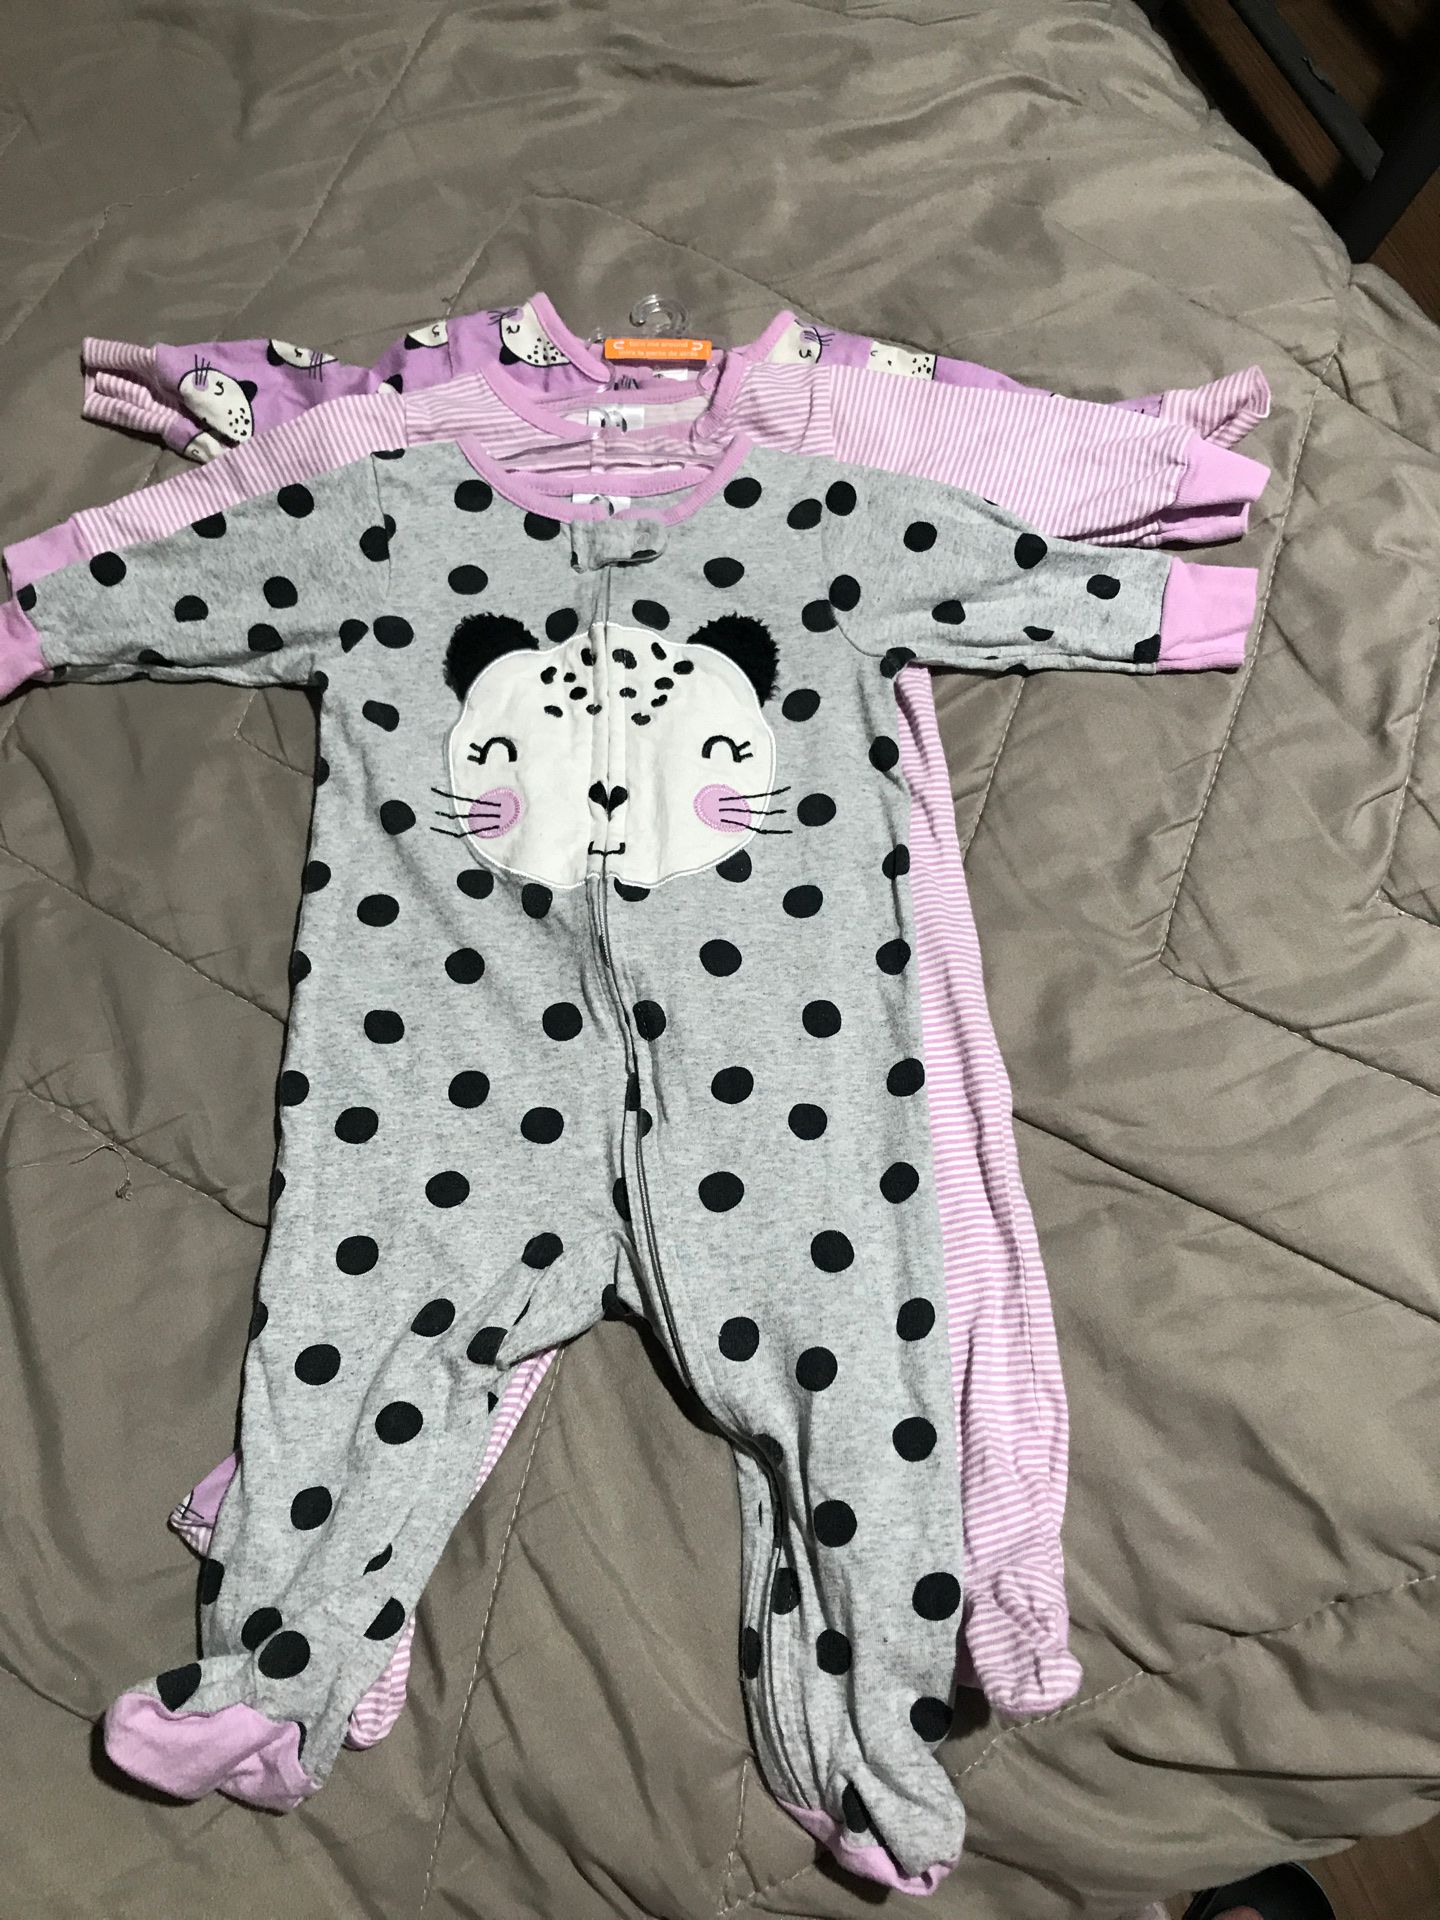 SET of 3 Baby pjs size 3-6 months